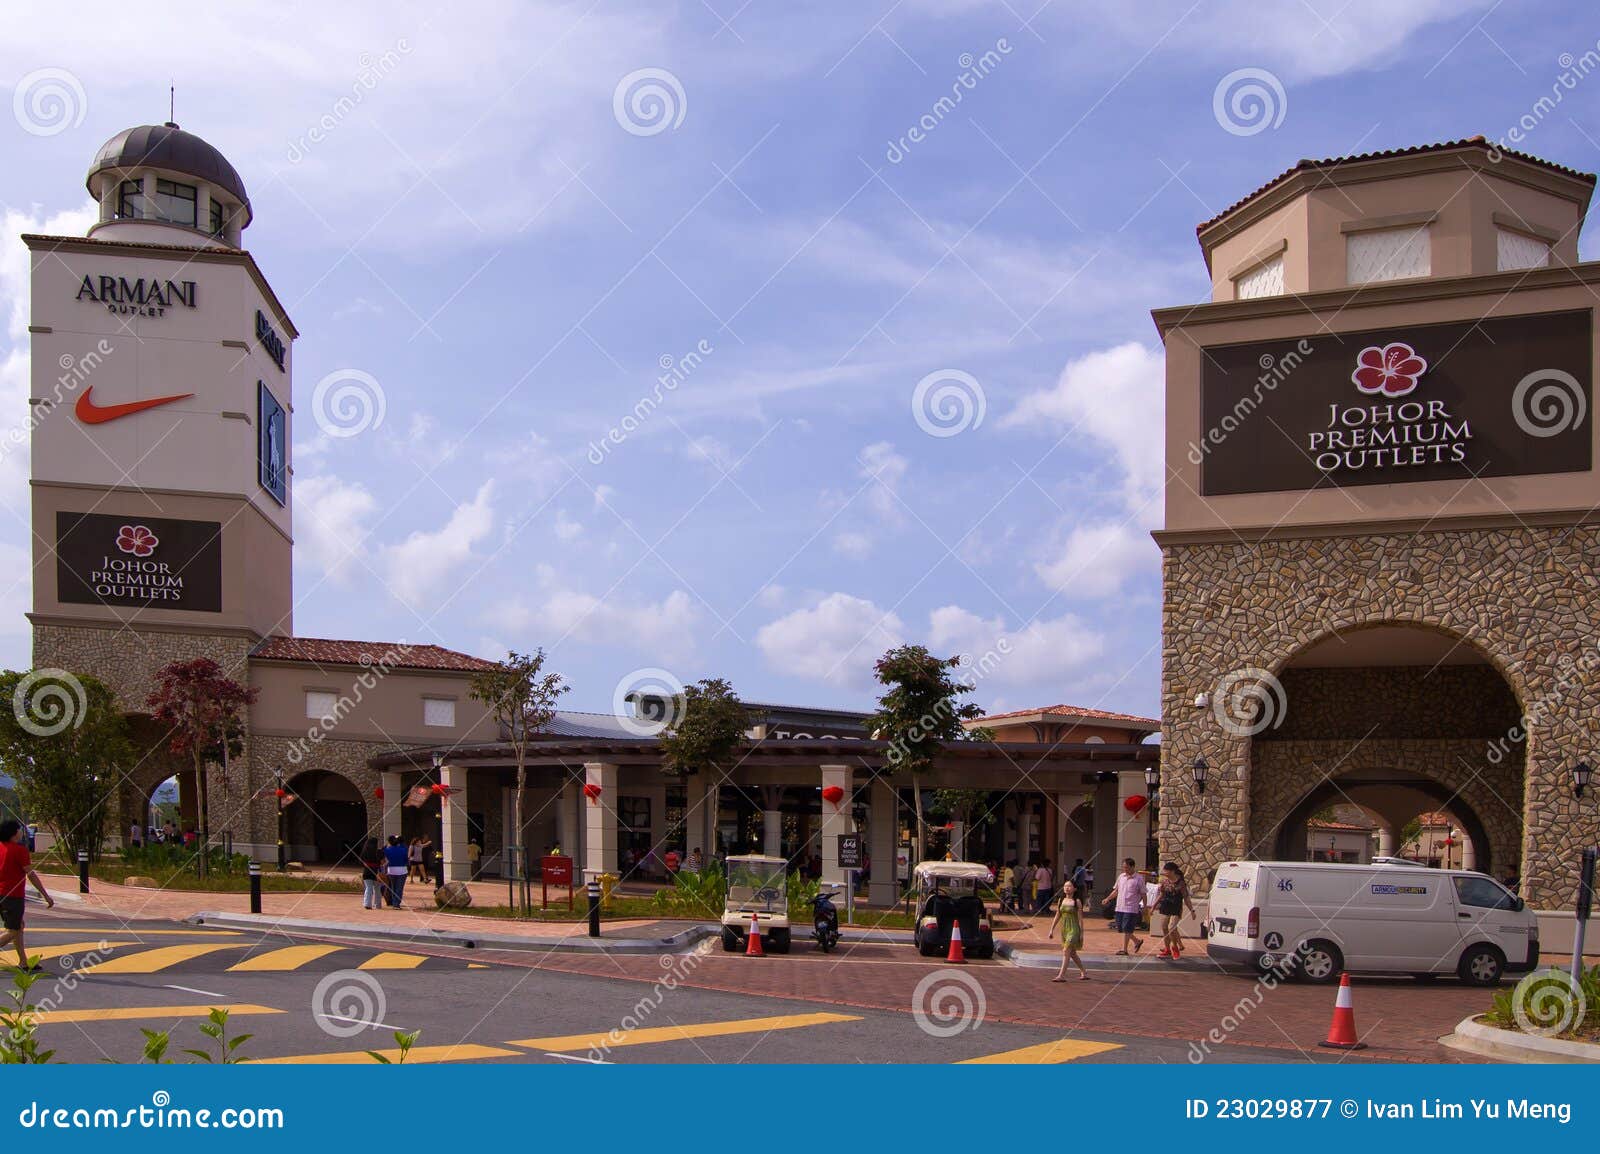 View Of Johor Premium Outlets An Outlet Mall In Johor Bahru Malaysia Stock  Photo - Download Image Now - iStock